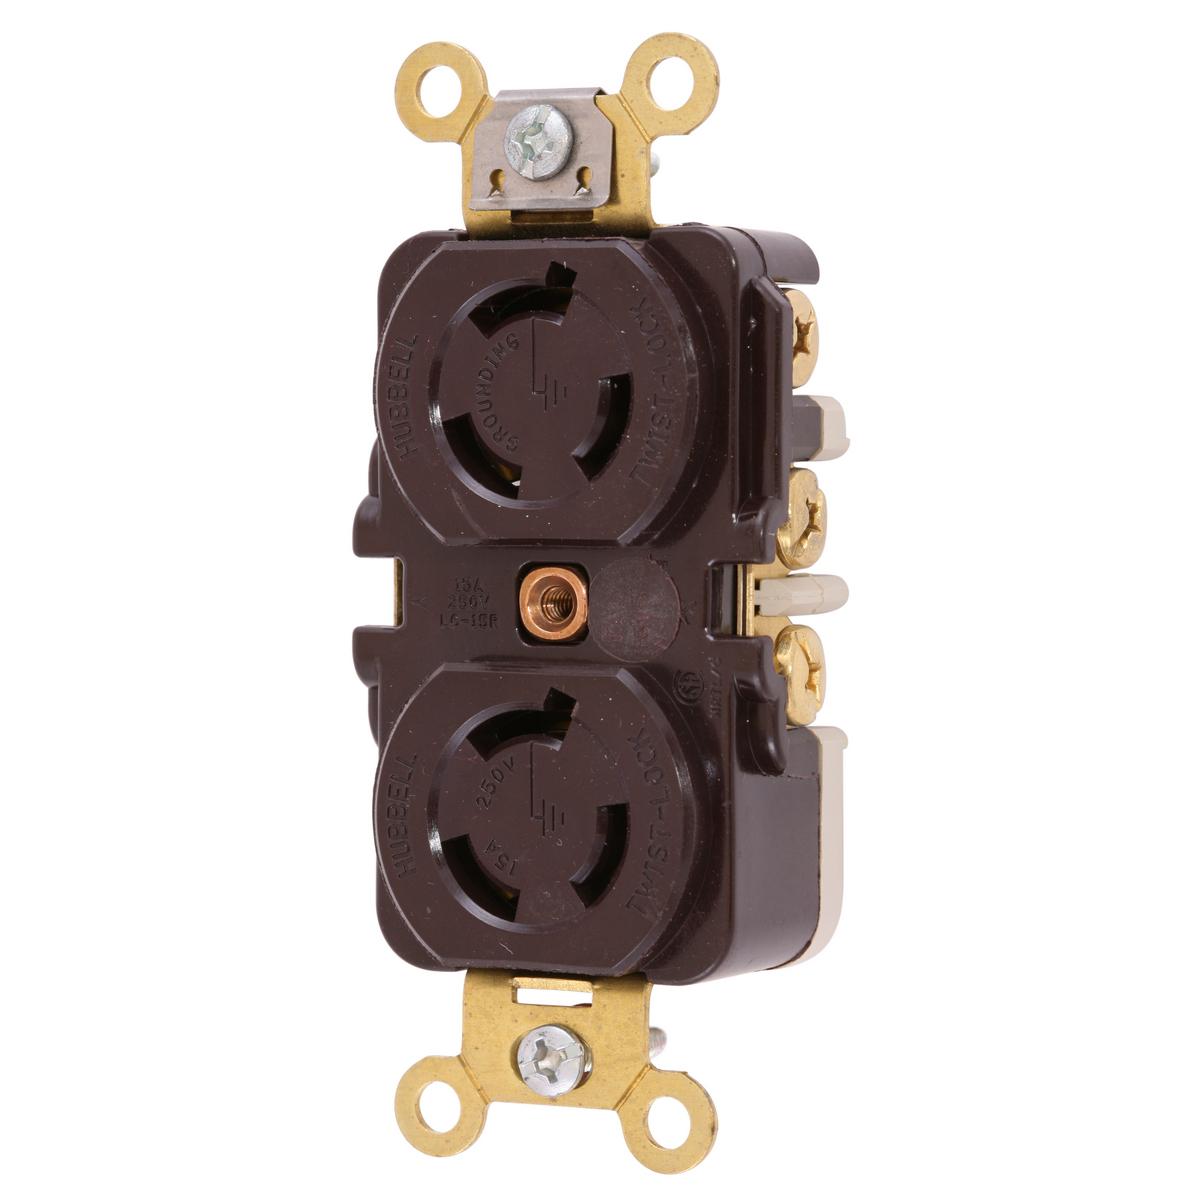 Hubbell HBL4550RT Locking Devices, Twist-Lock®, Industrial, Duplex Receptacle, 15A 250V, 2-Pole 3-Wire Grounding, NEMA L6-15R, Ring Terminal Connection, Brown.  ; Reinforced thermoplastic construction ; Single piece, all brass contacts ; Single point break-off tabs ; Mount